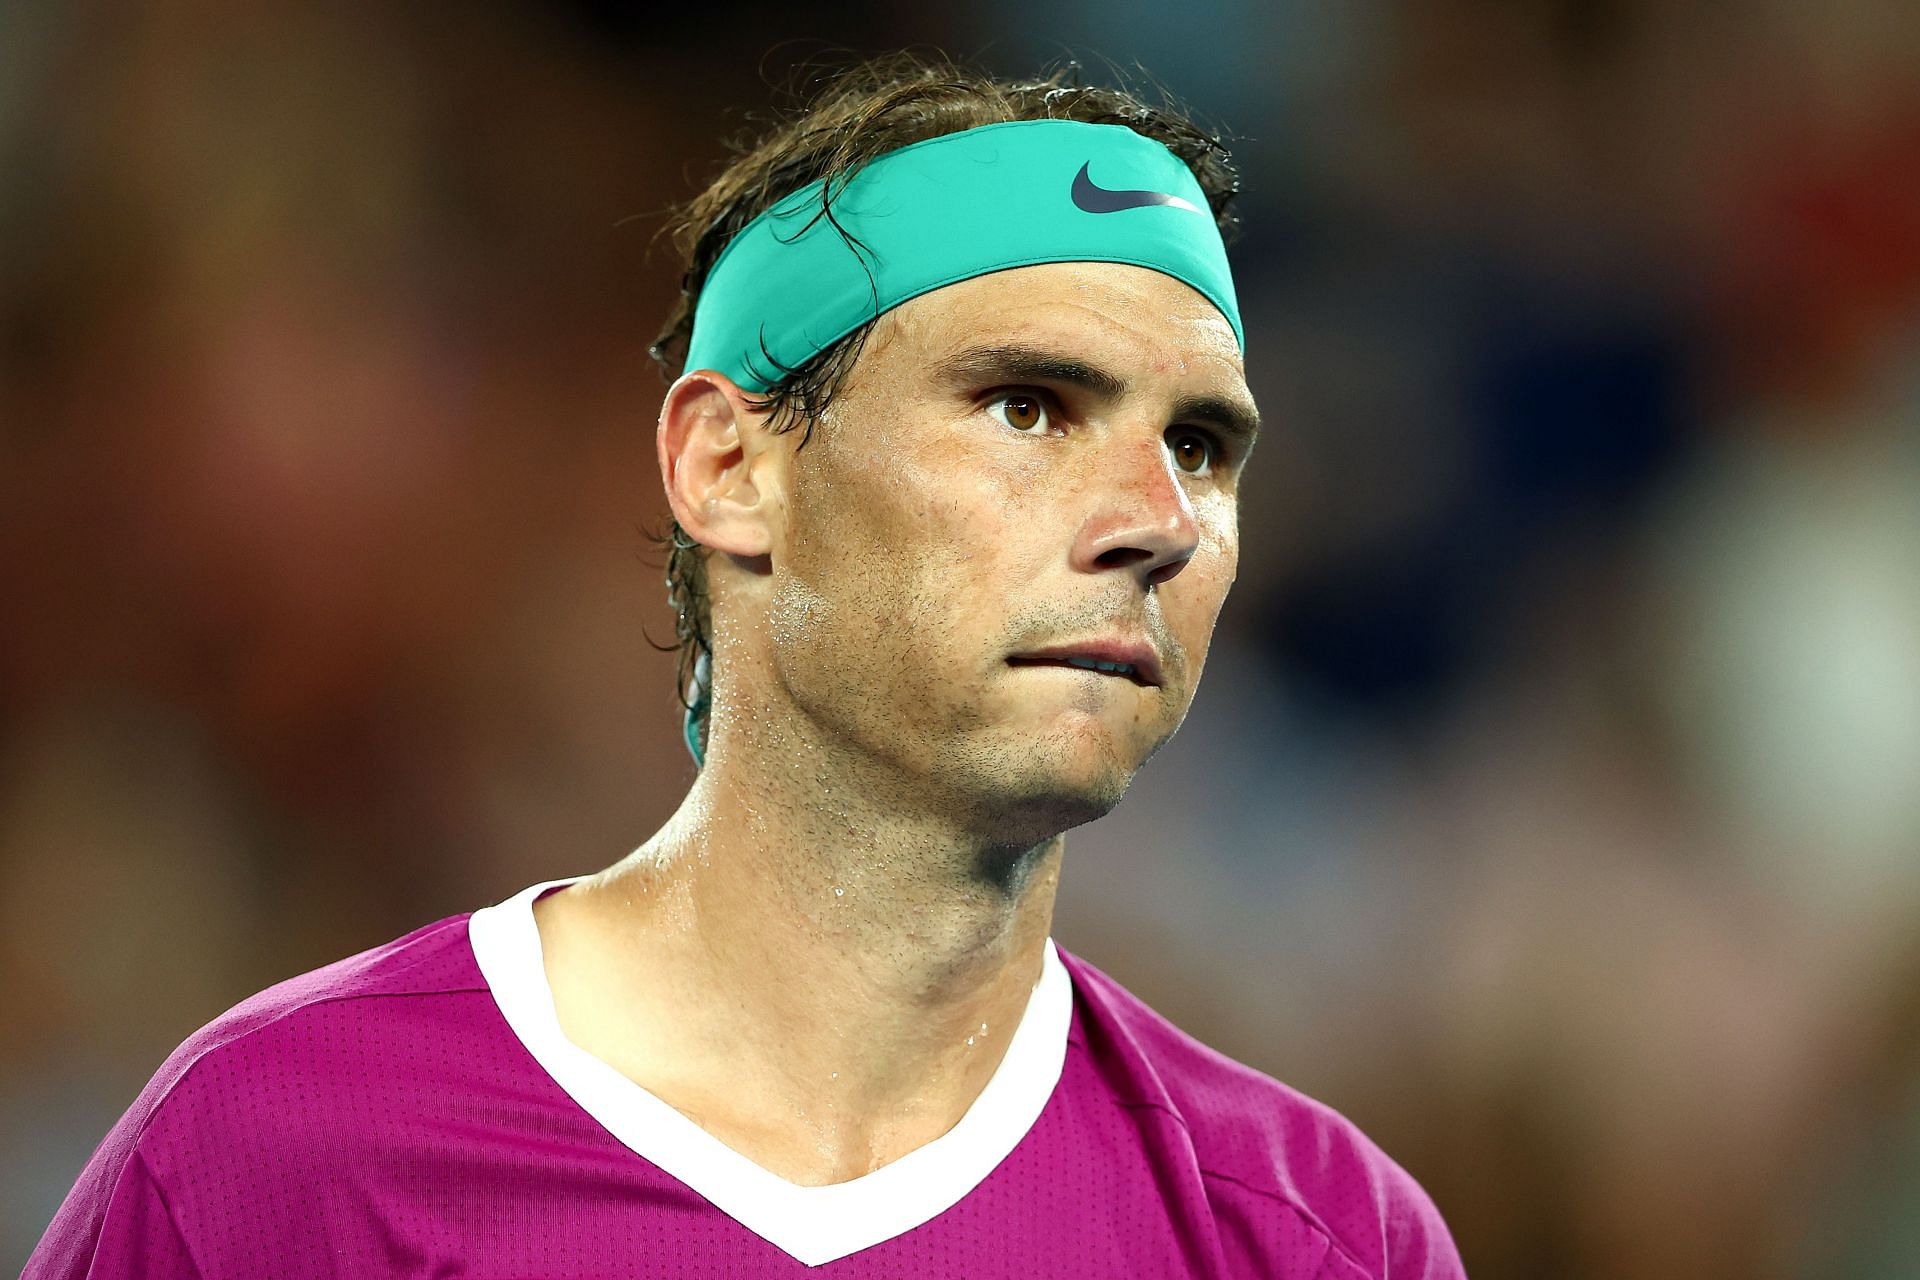 Rafael Nadal lost the second set in a tiebreaker after going a break up